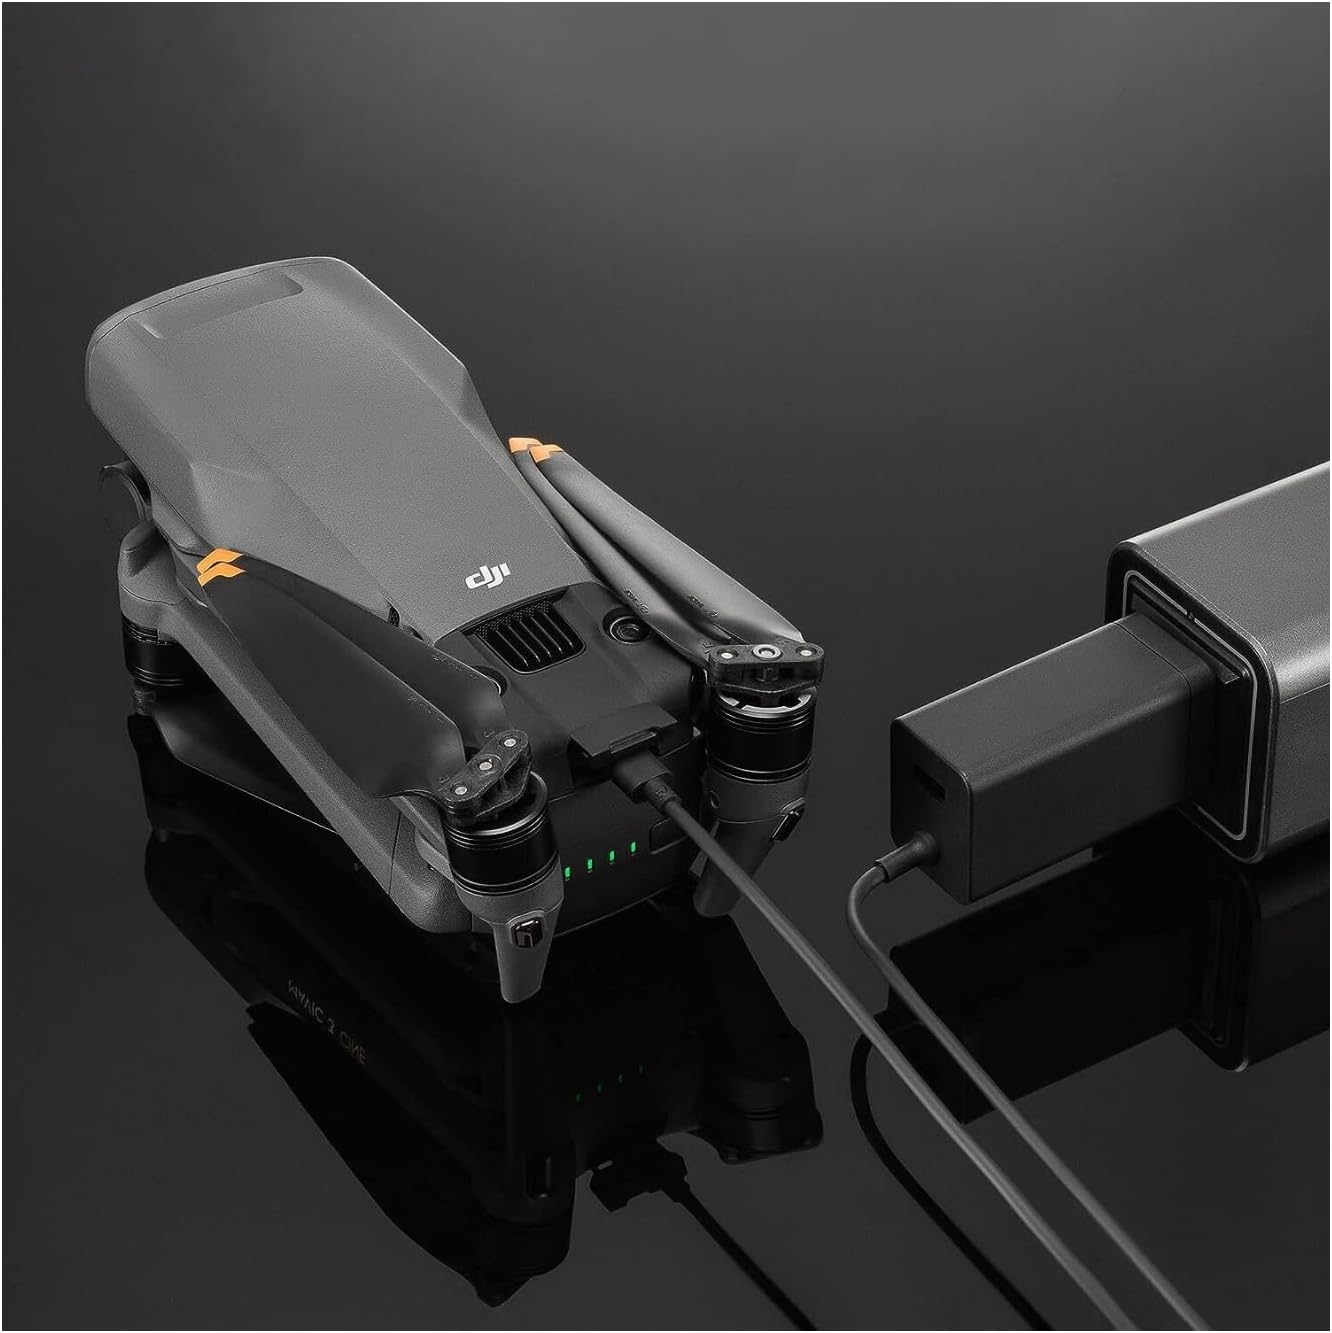 65W Portable Charger for dji drone